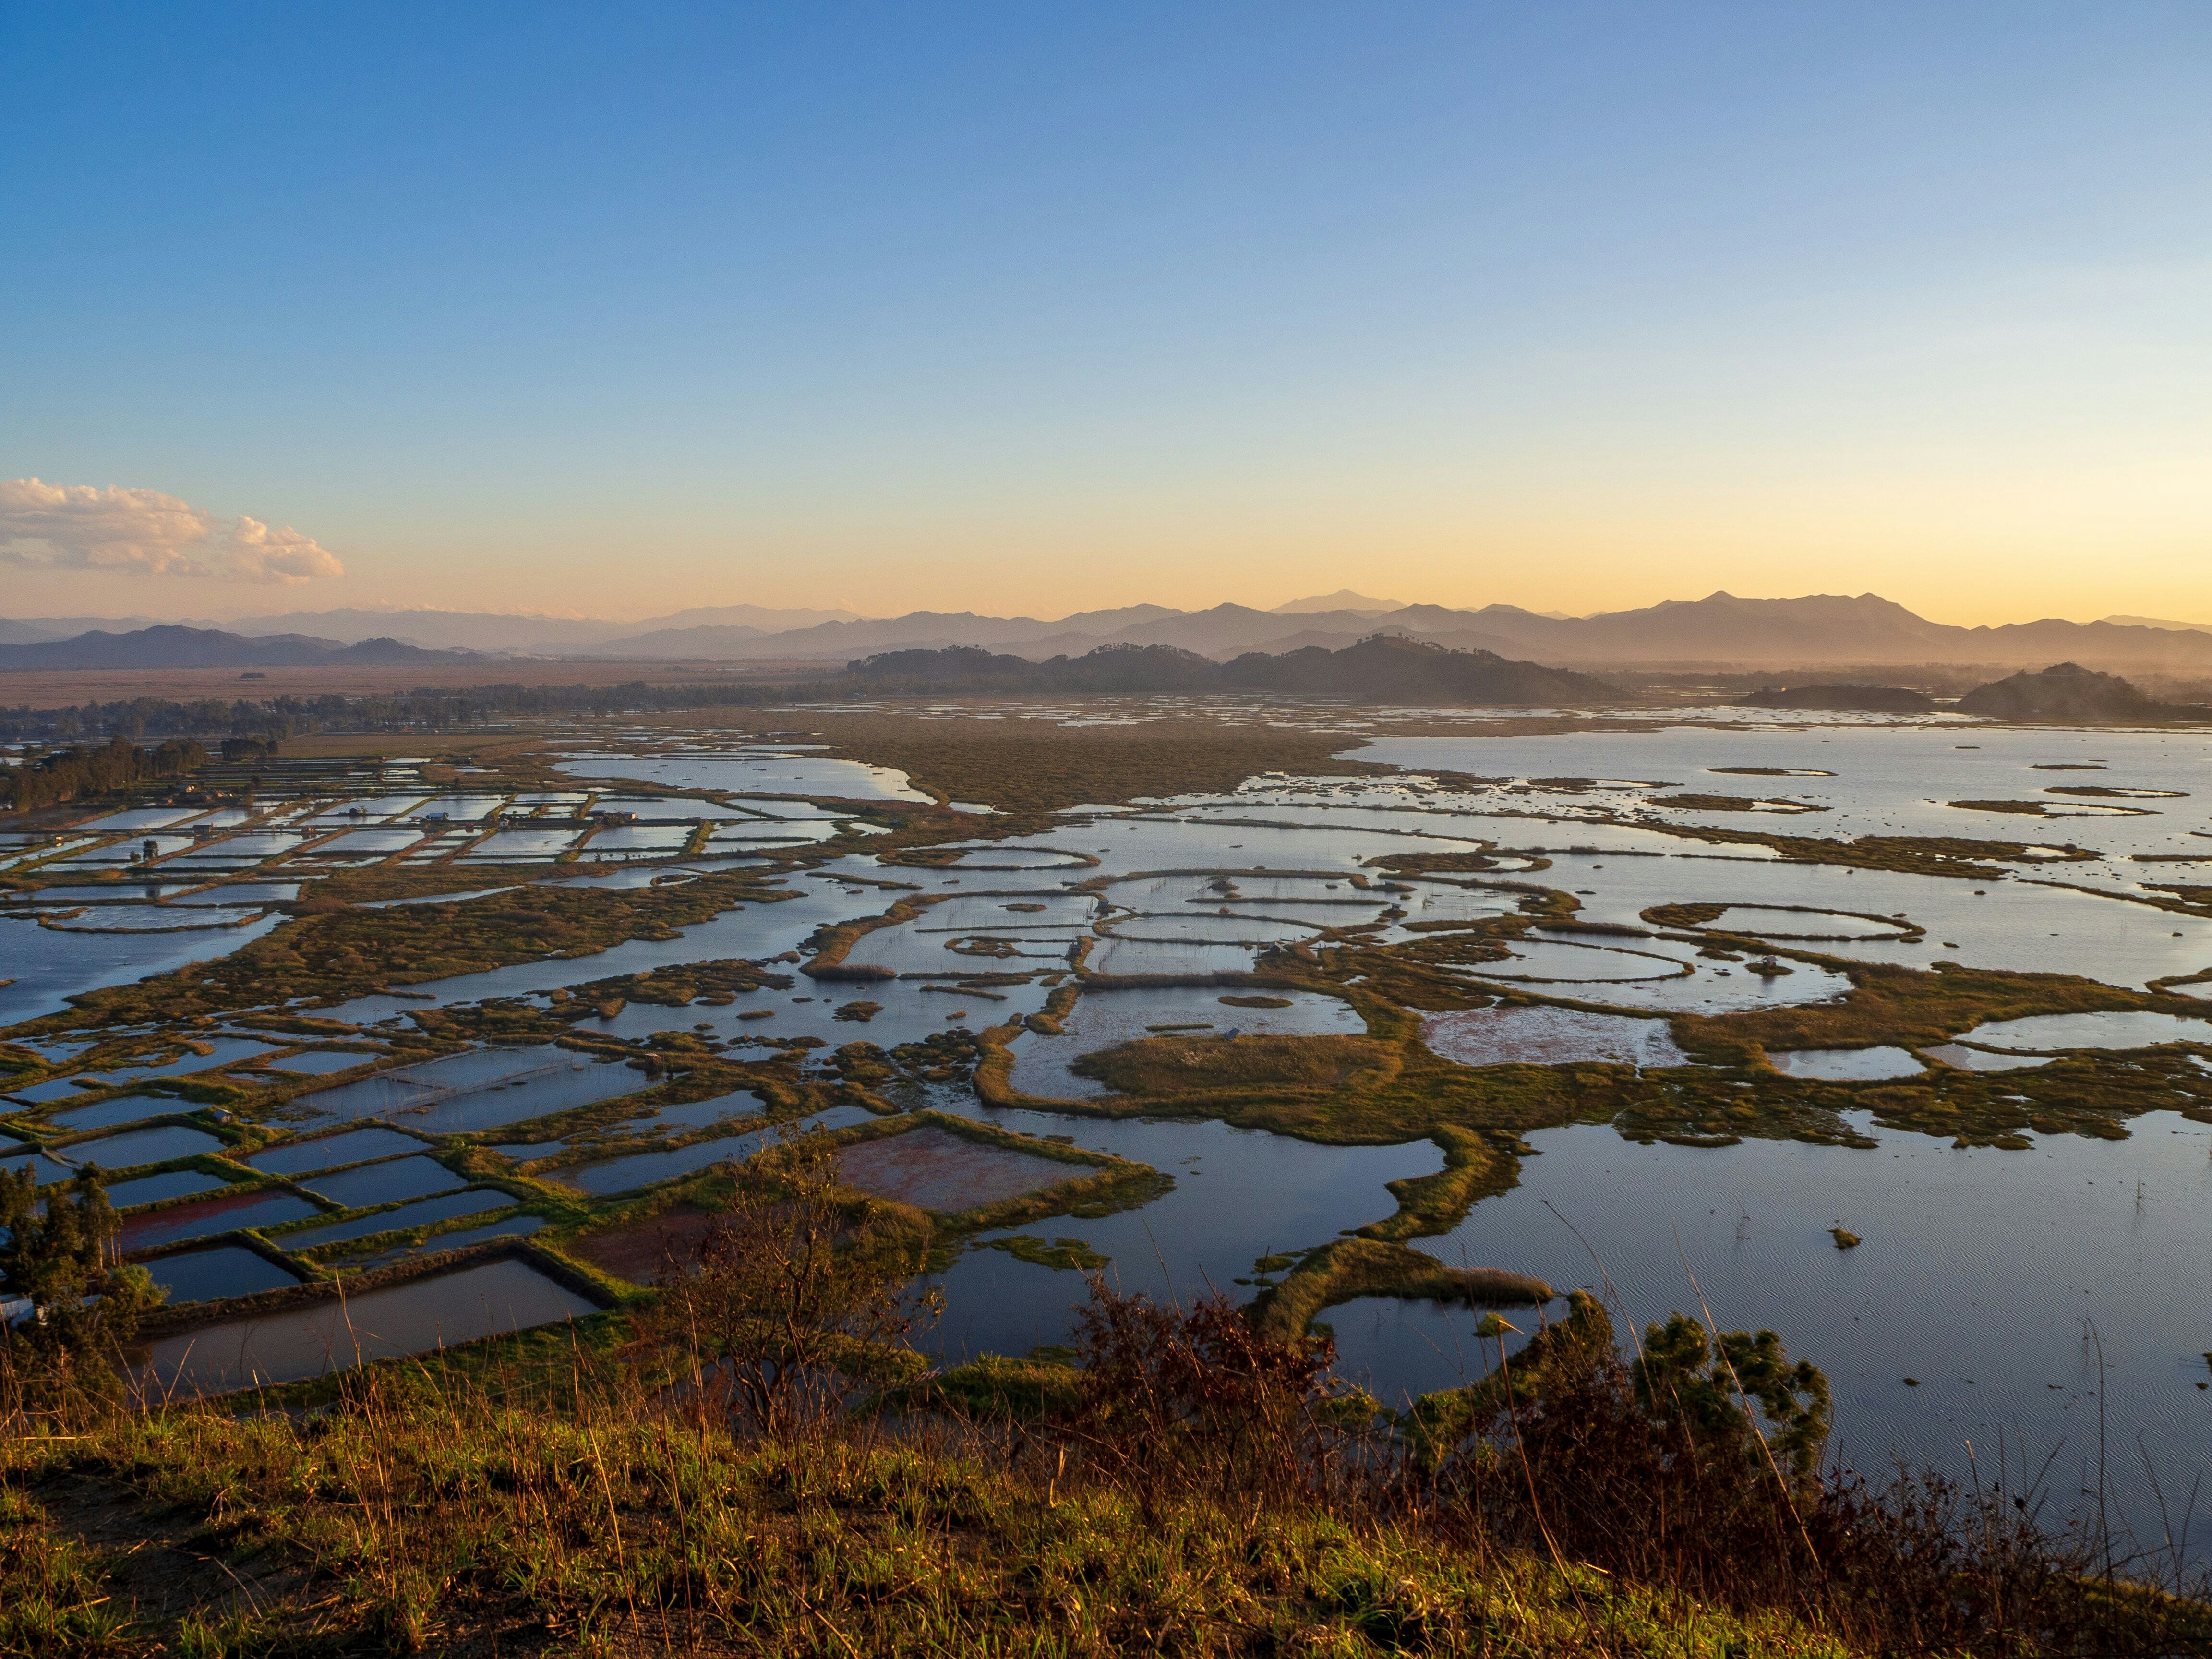 Aerial view of Loktak Lake, showing its green islands of vegetation which float on the lake's surface. The lake is backed by mountains in the distance.